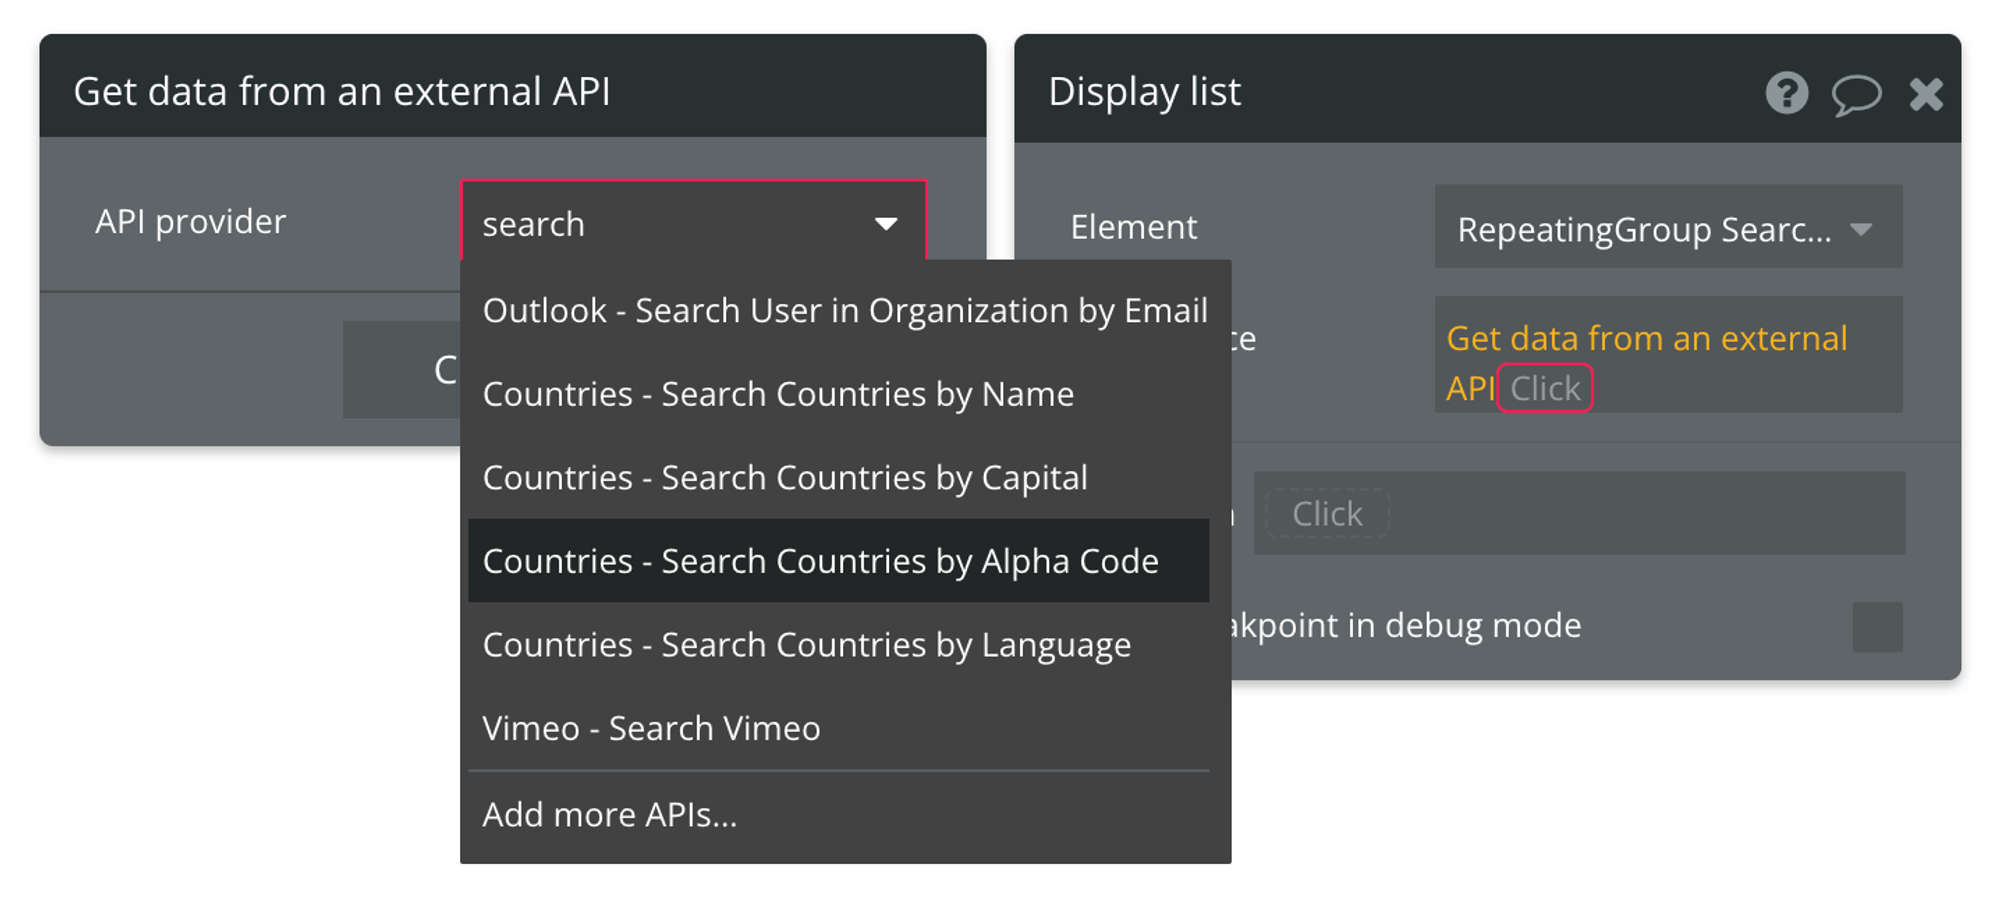 Select "Get data from external API" from the list of data sources, then find Countries - Search Countries by Alpha Code from the list of API providers